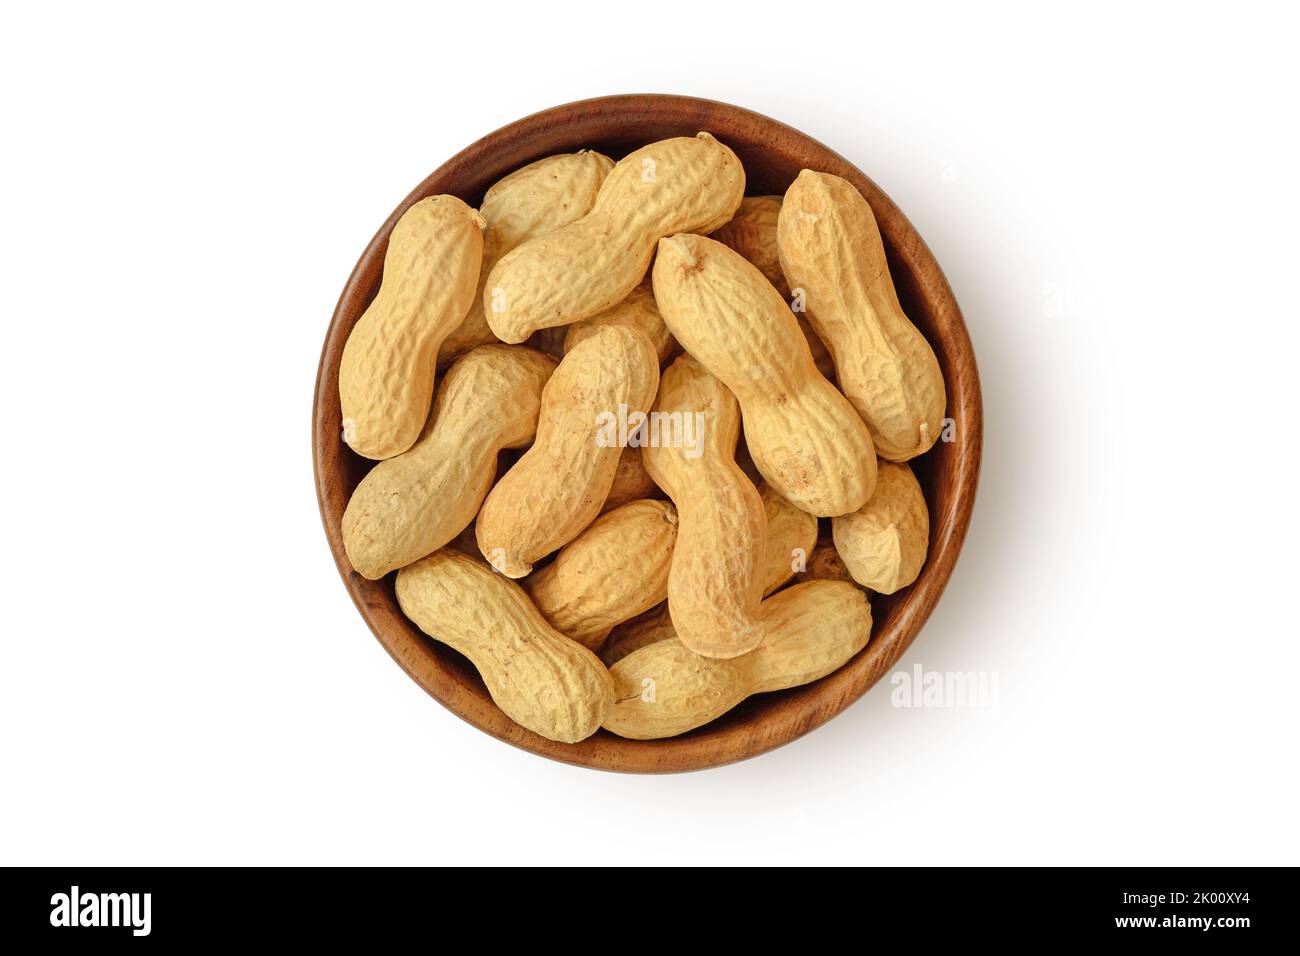 Shelled peanuts in wooden bowl on white background Stock Photo